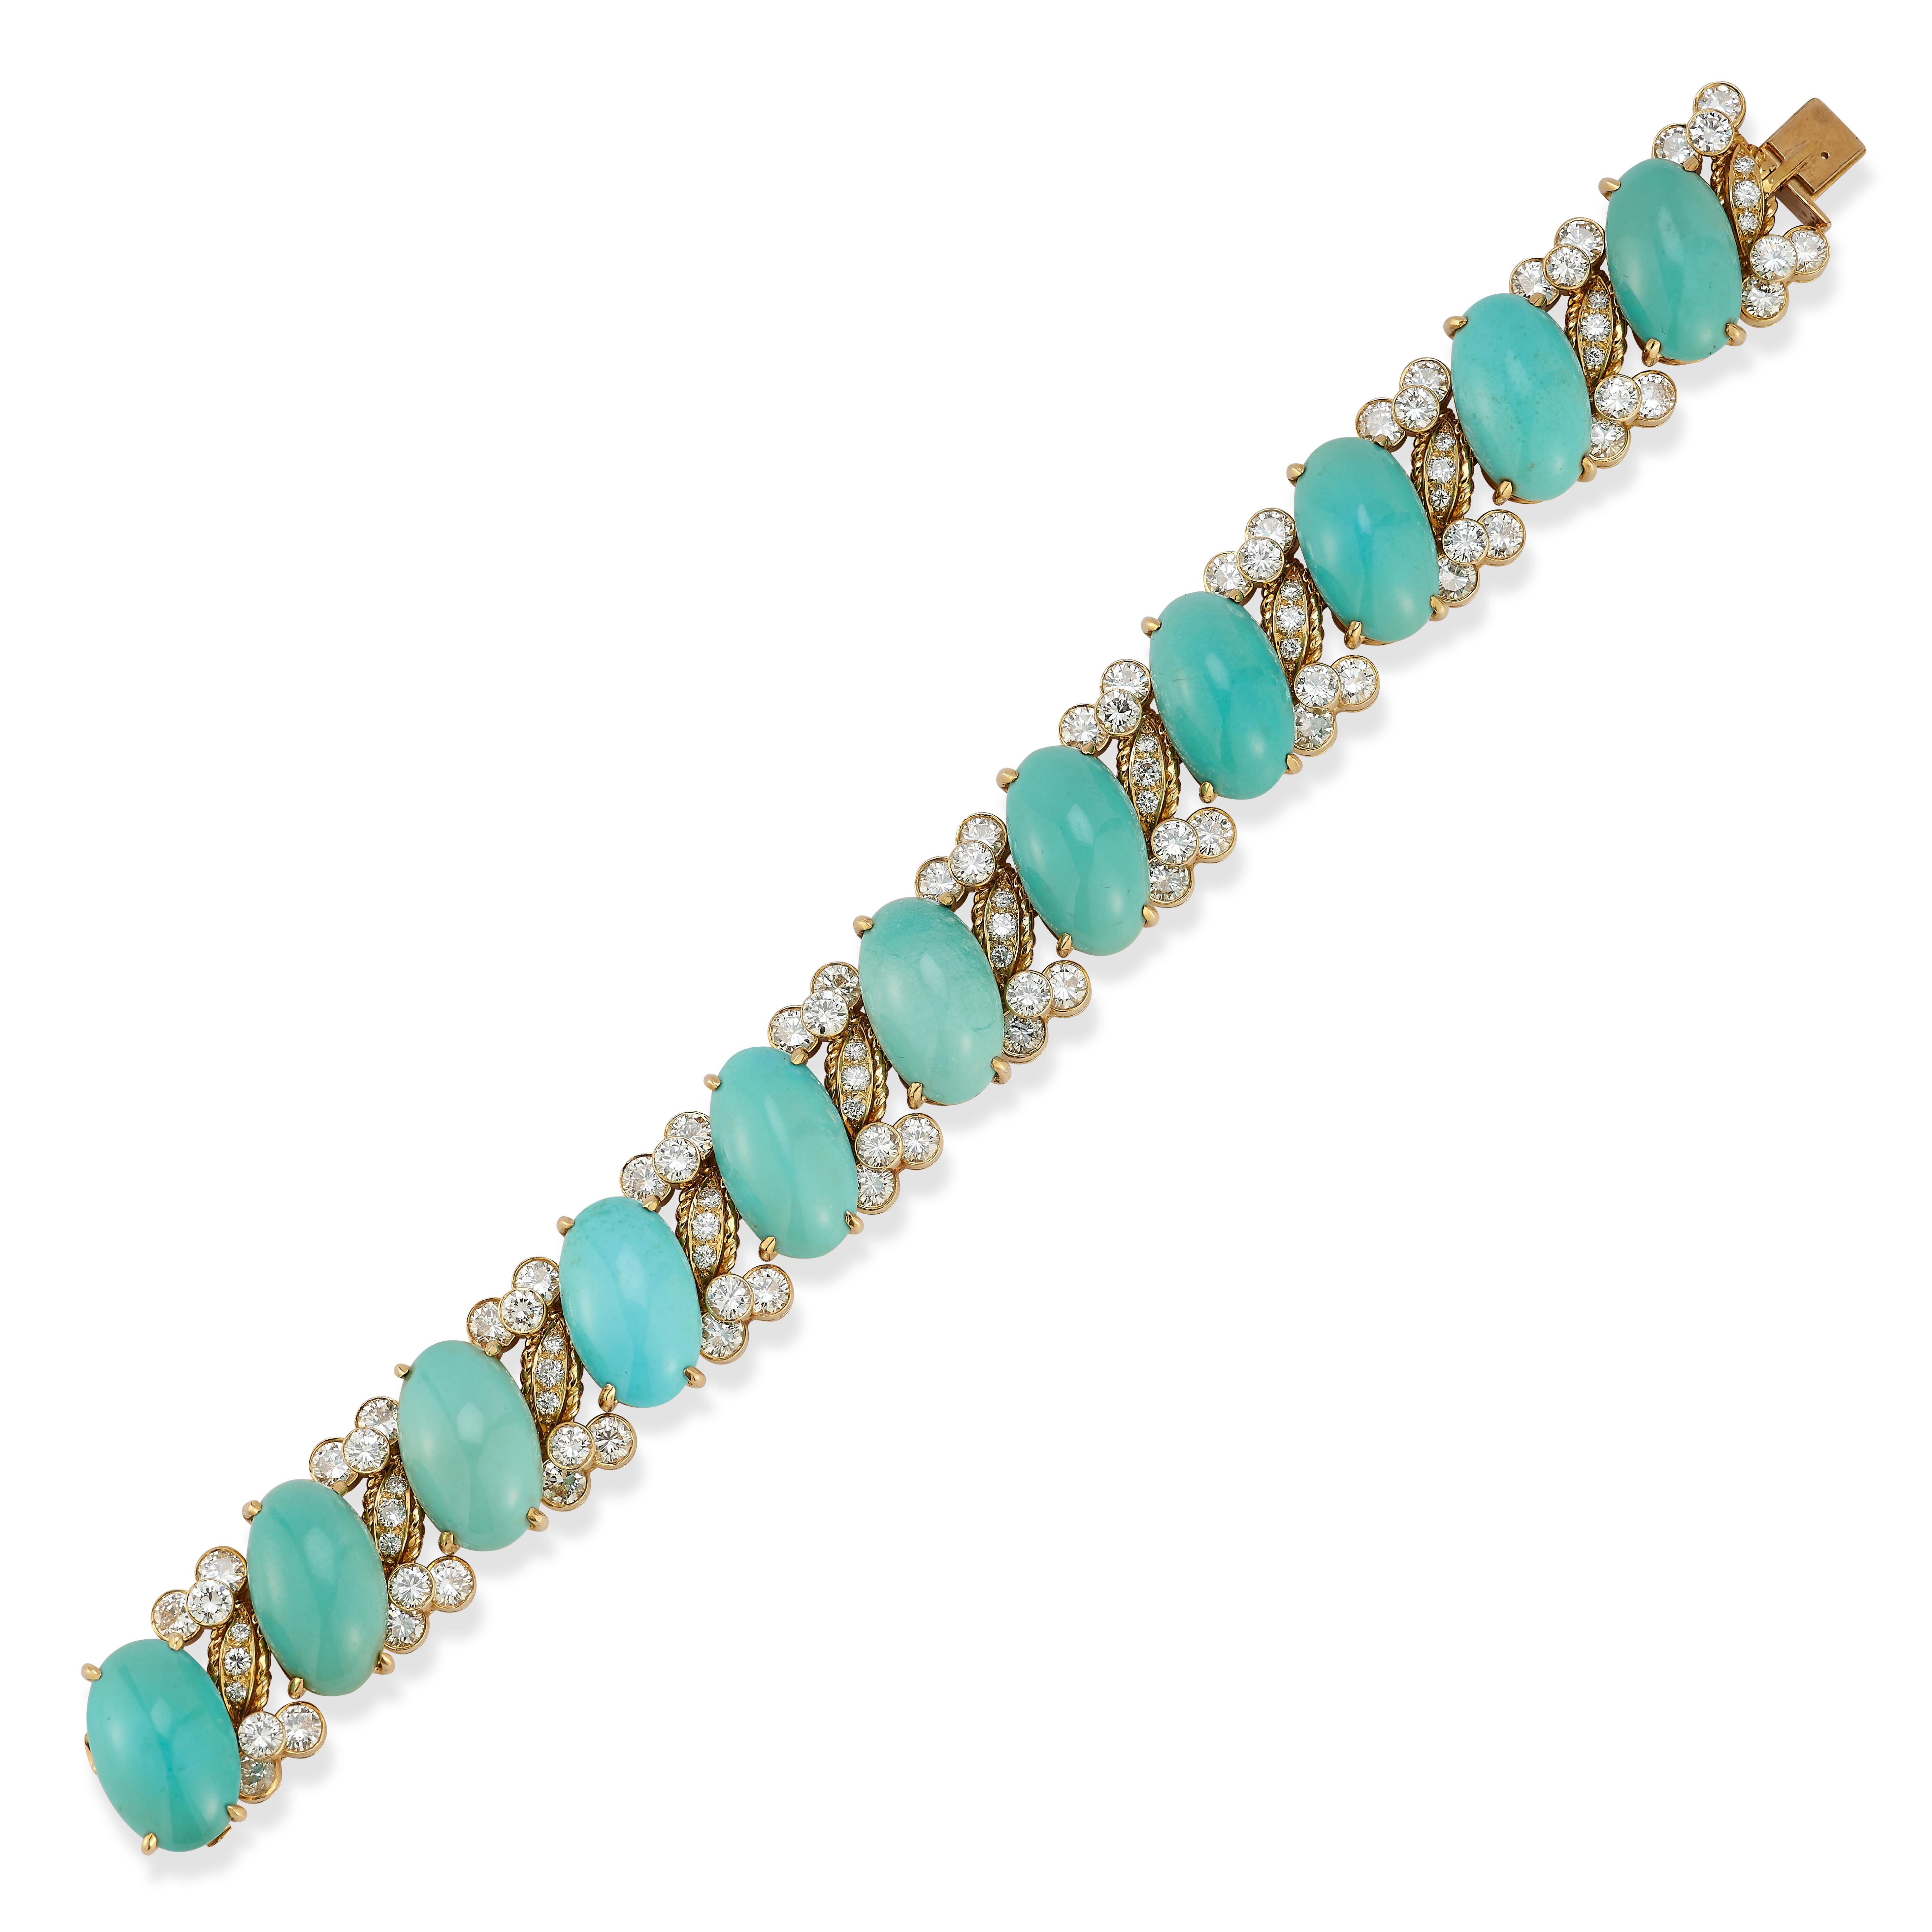 Van Cleef & Arpels Turquoise & Diamond Bracelet

An 18 karat yellow gold bracelet with alternating links set with round cut diamonds and cabochon turquoise 

Signed VC&A and numbered

Length: 7.5